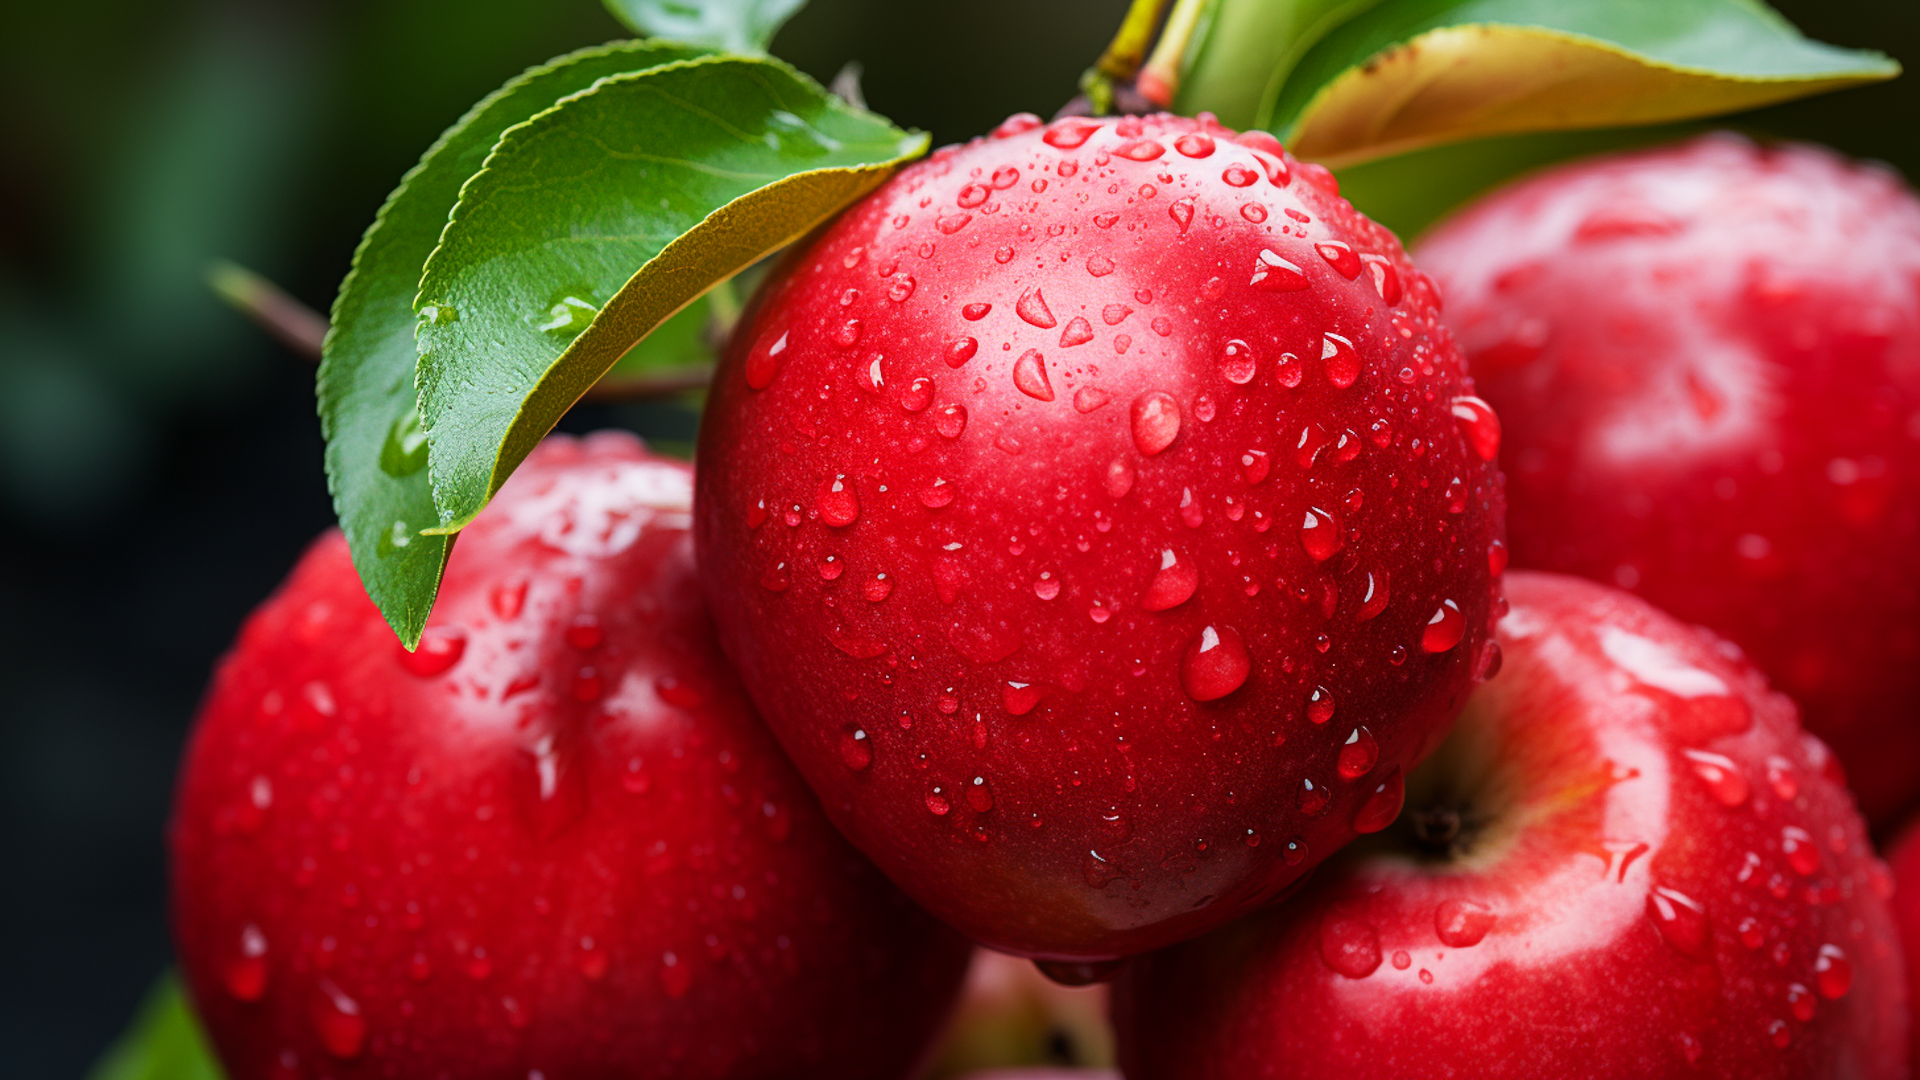 General 1920x1080 AI art fruit nature red water closeup blurred blurry background leaves apples